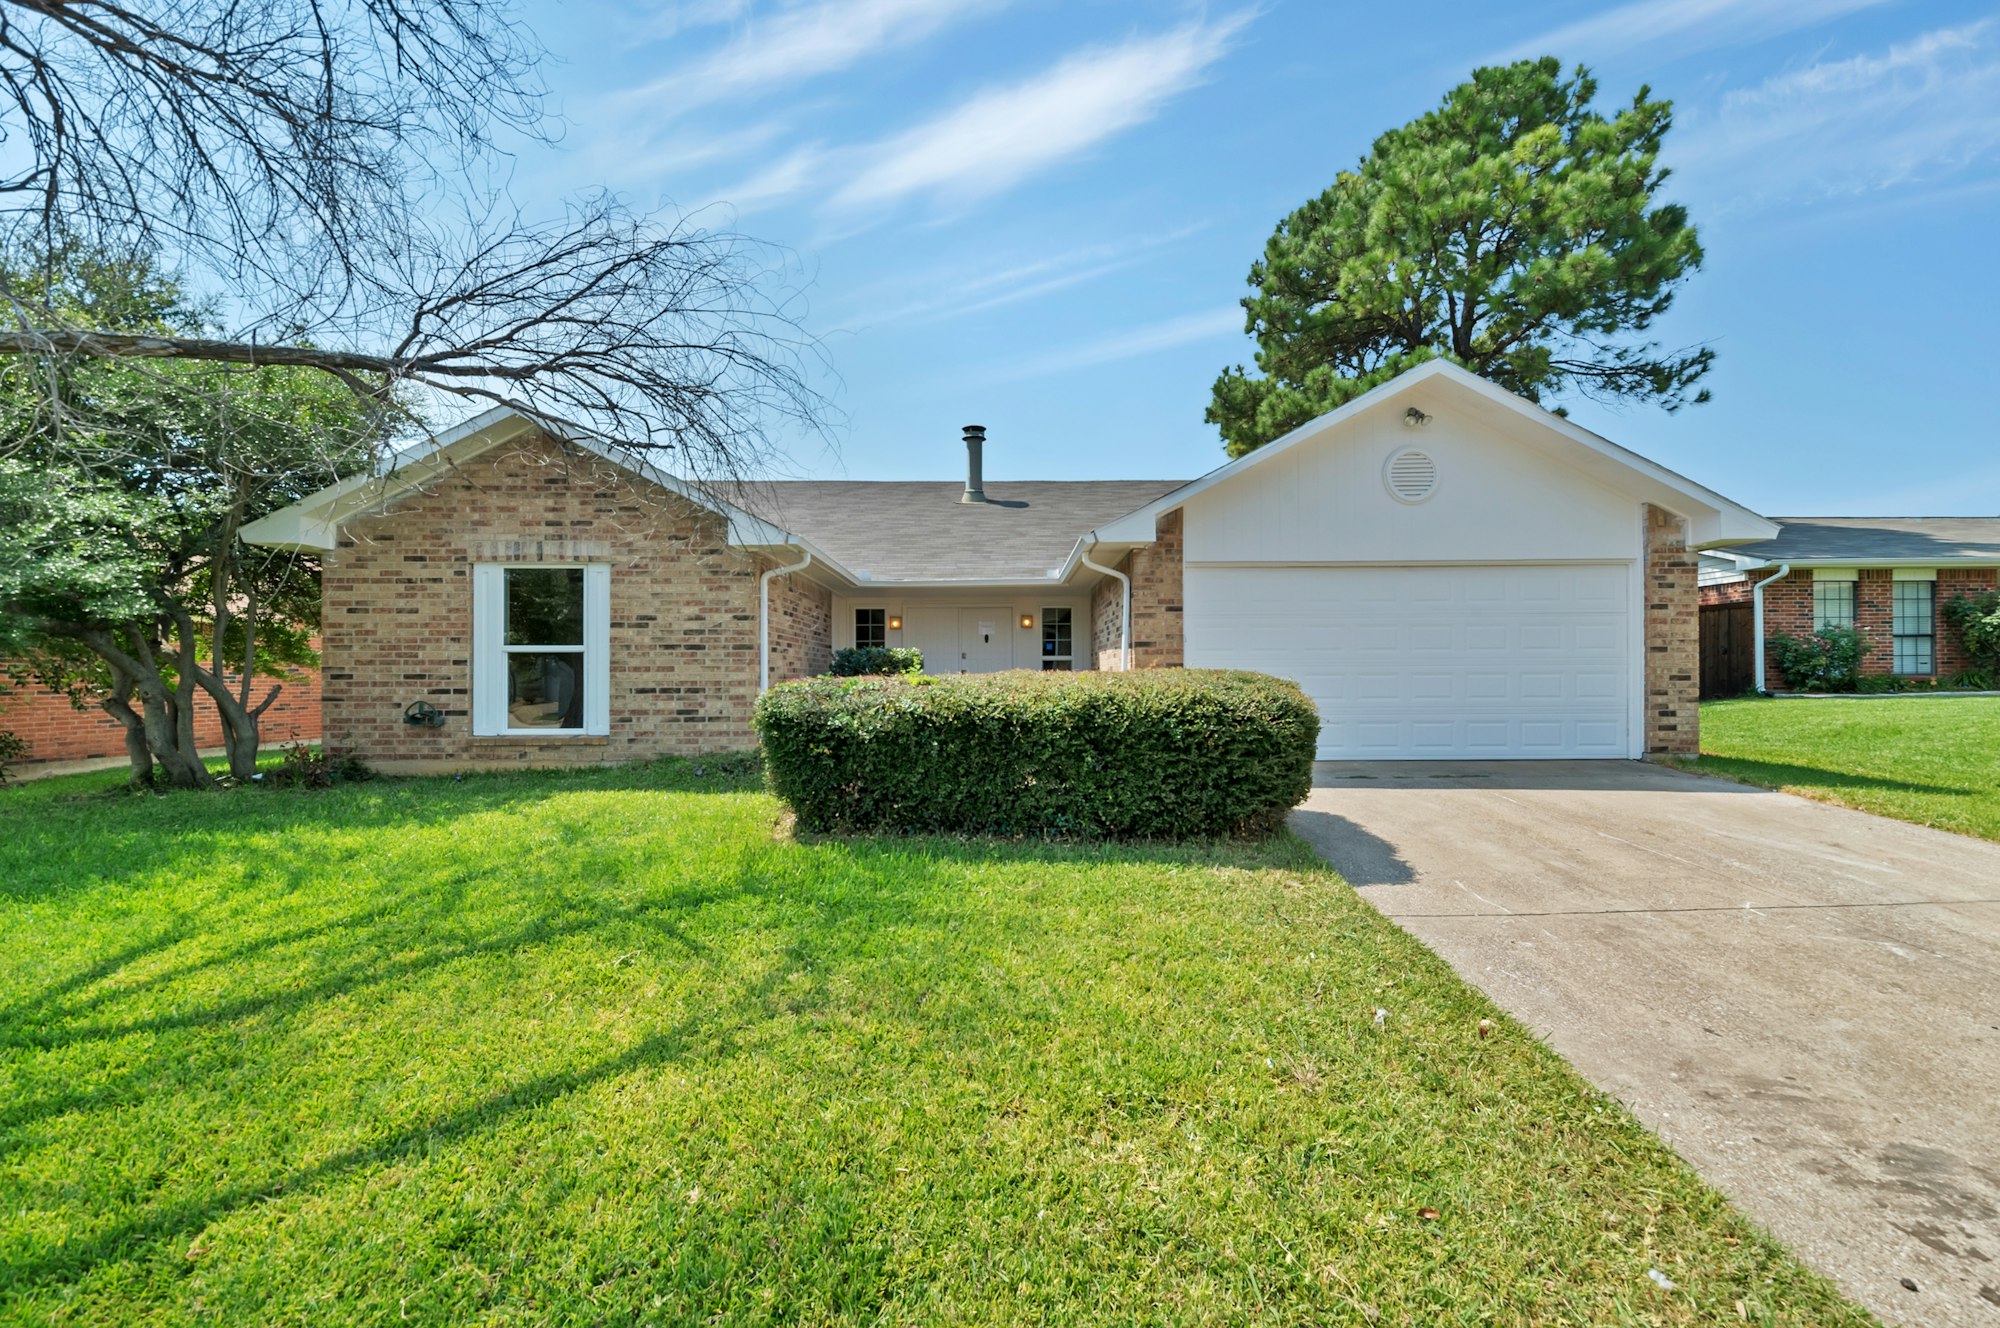 Photo 1 of 22 - 2409 Chinaberry Dr, Bedford, TX 76021